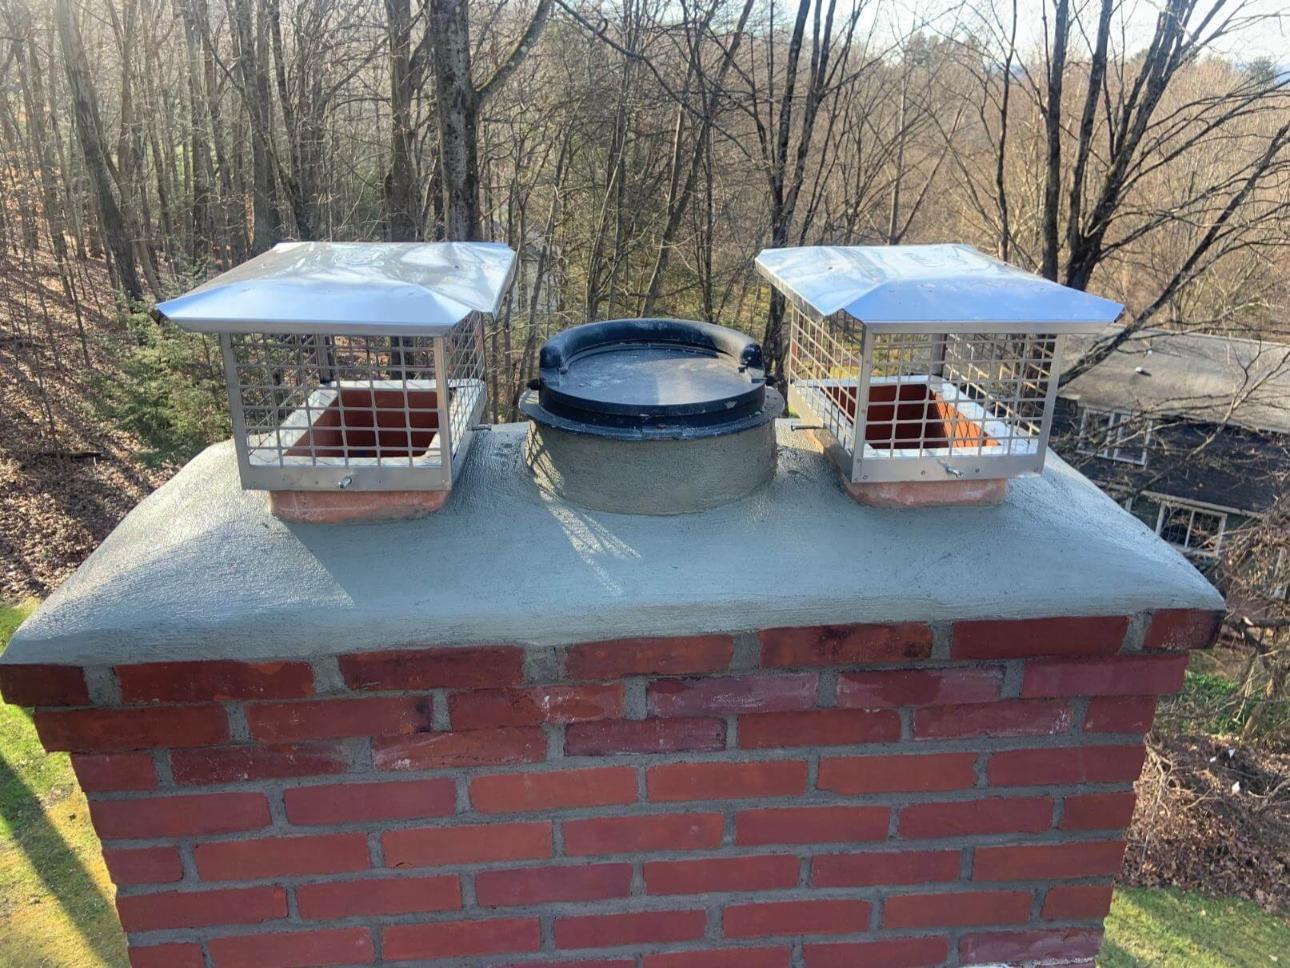 Two bird feeders on top of a brick chimney.